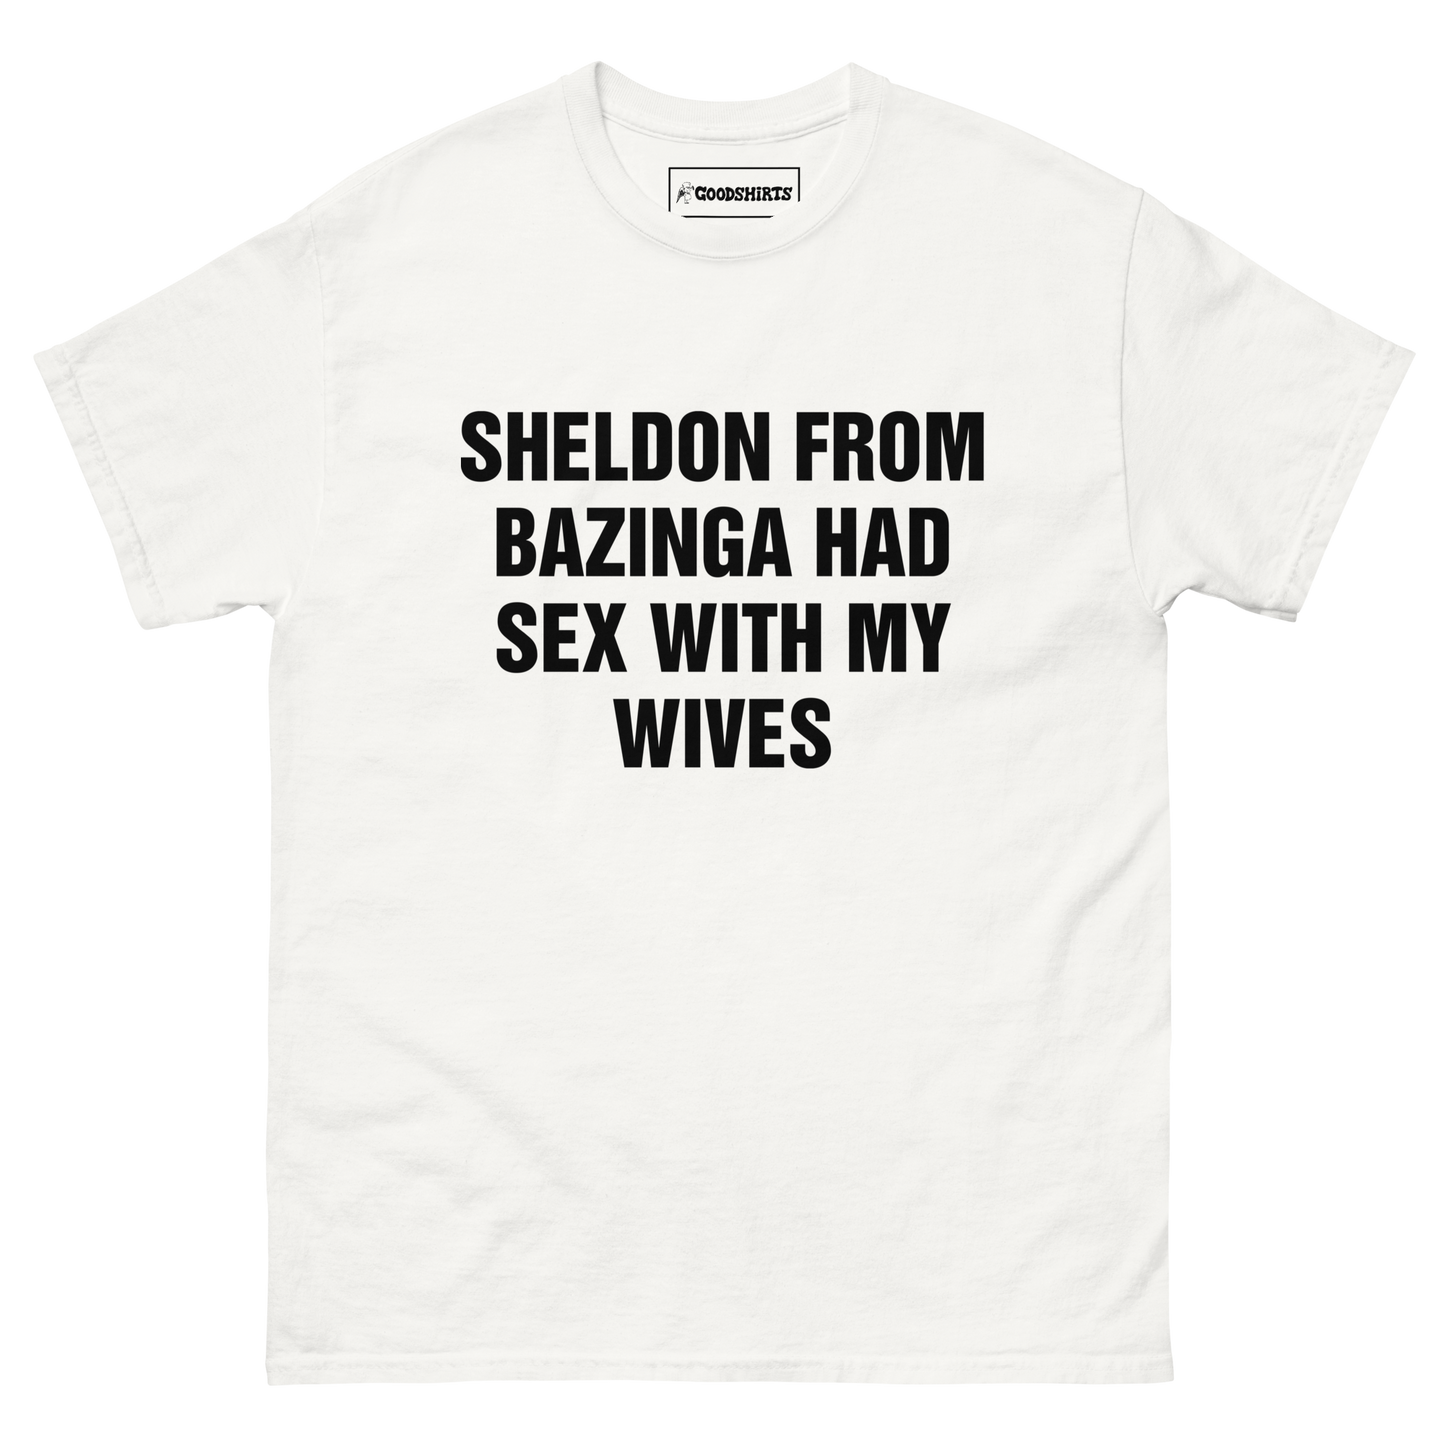 Sheldon From Bazinga Had Sex With My Wives.